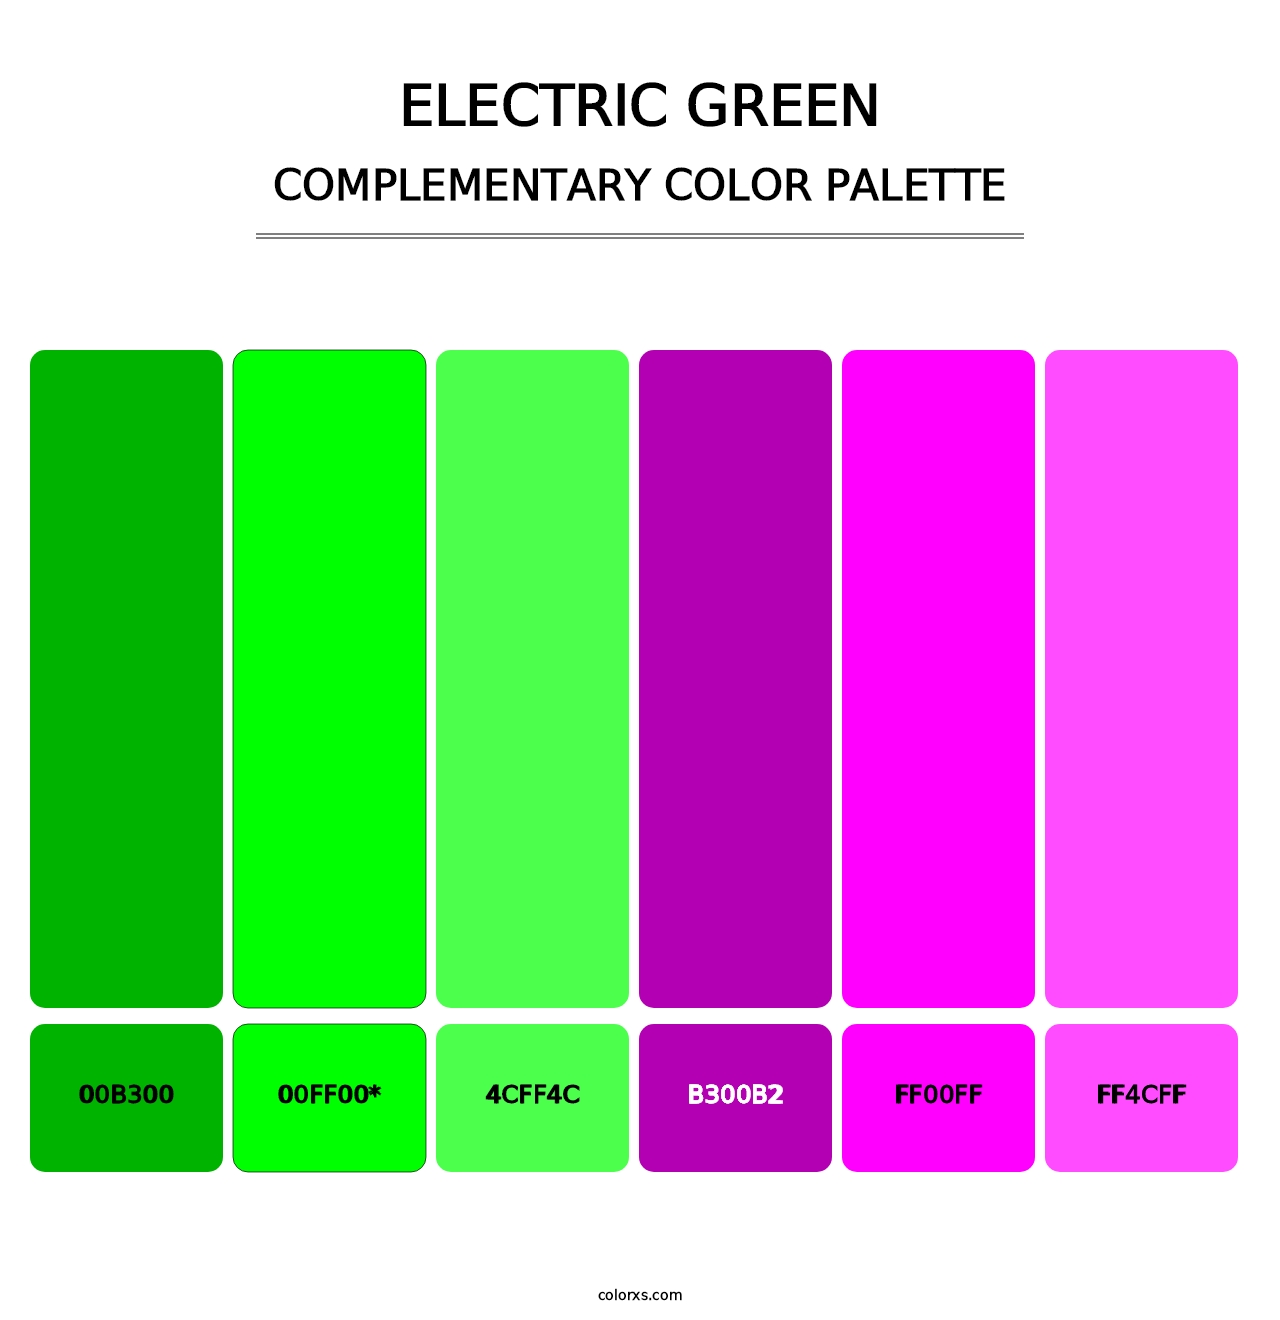 Electric Green - Complementary Color Palette